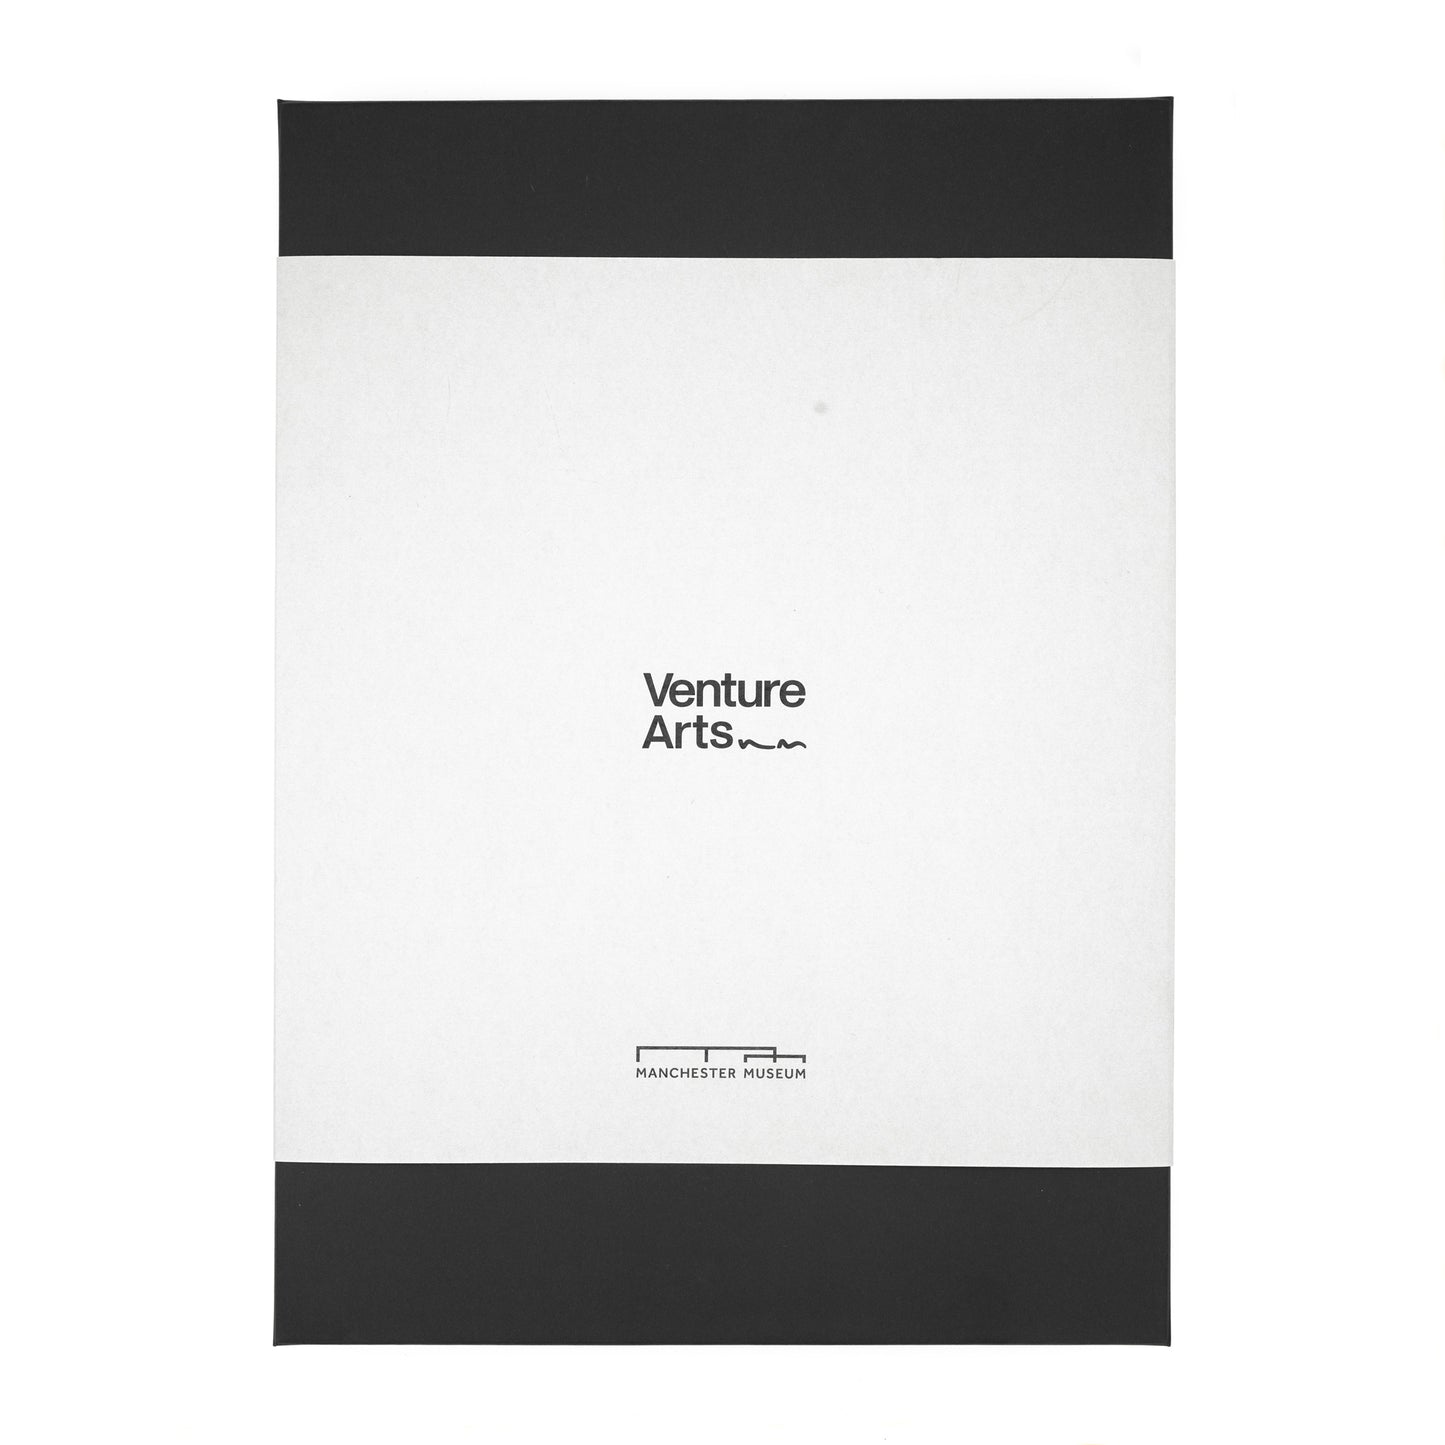 Front cover of a grey and black portfolio box with the Venture Arts logo at the centre and the Manchester Museum logo at the bottom centre - white background.